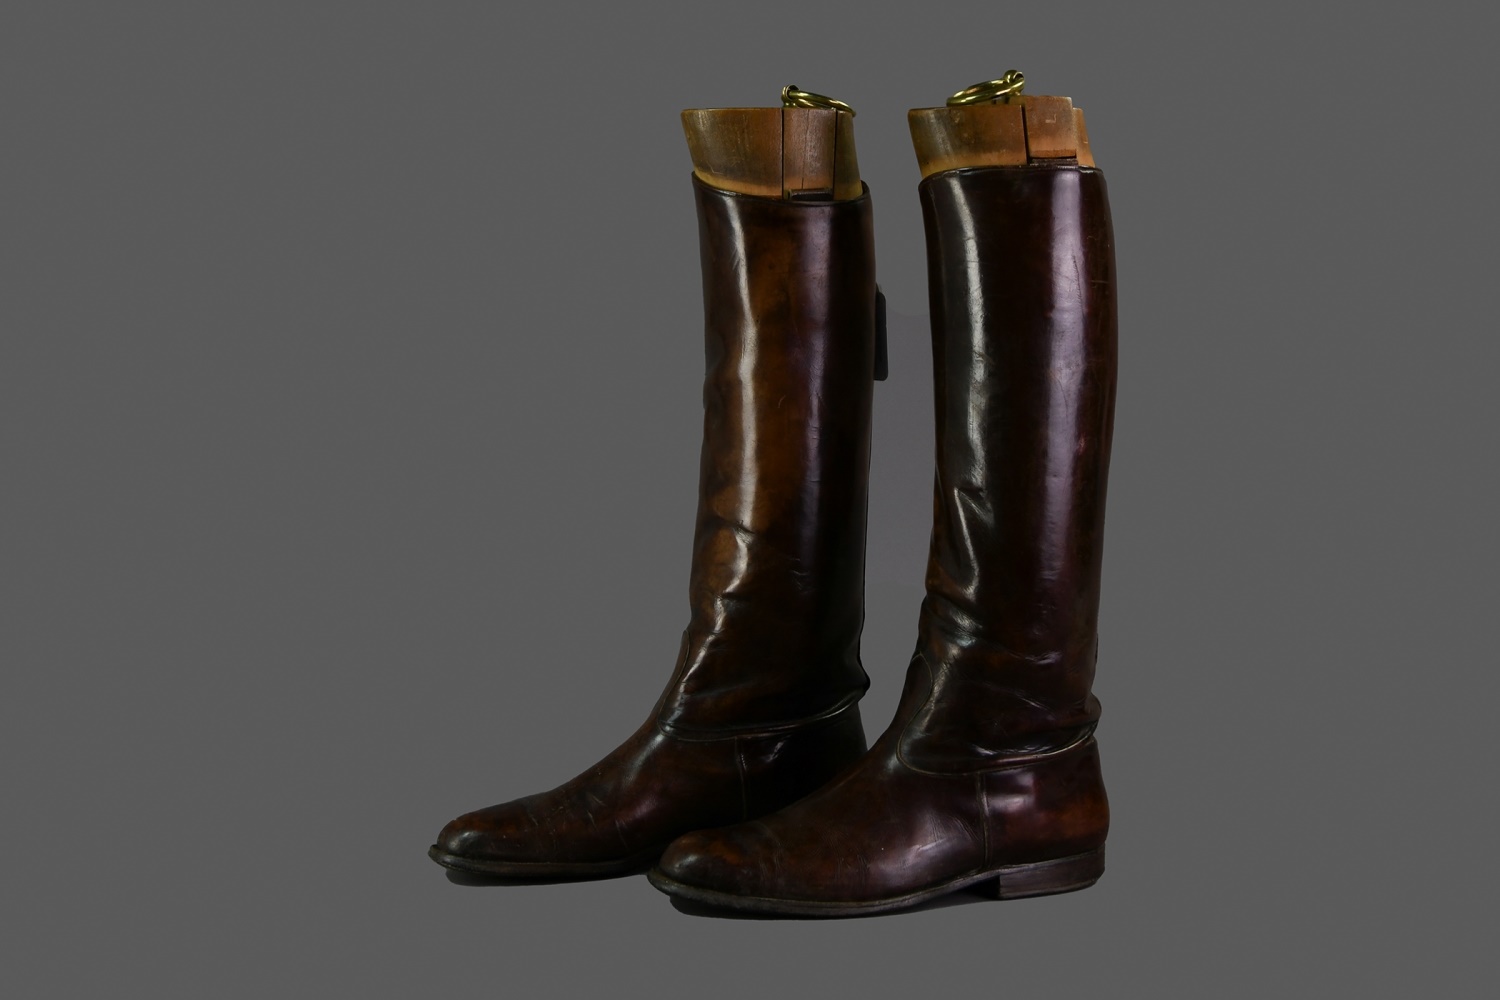 A PAIR OF VICTORIAN BROWN LEATHER RIDING BOOTS